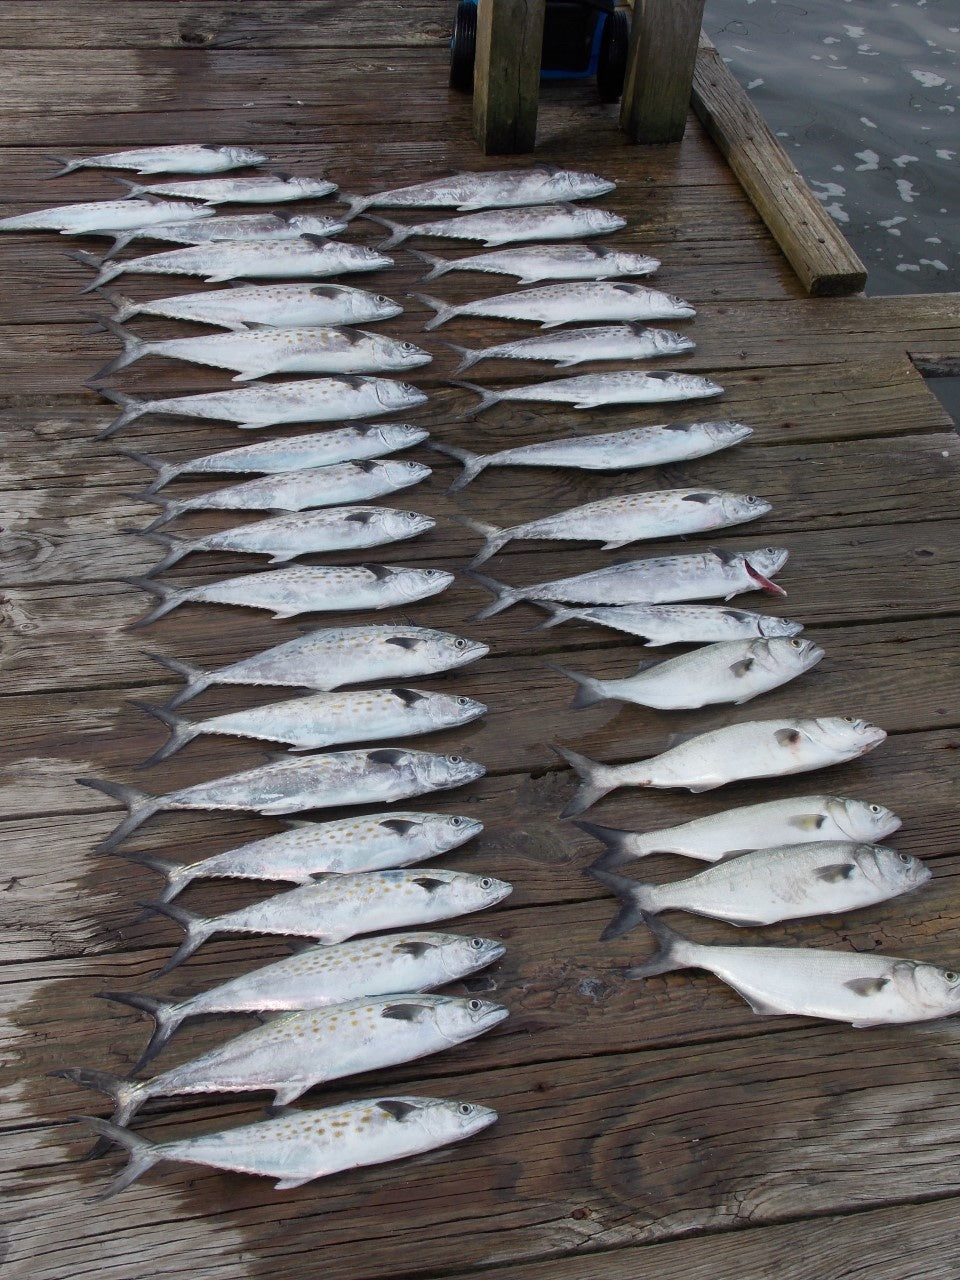 North Carolina’s Crystal Coast – An Alternative to Numb Hands and Frozen Reels